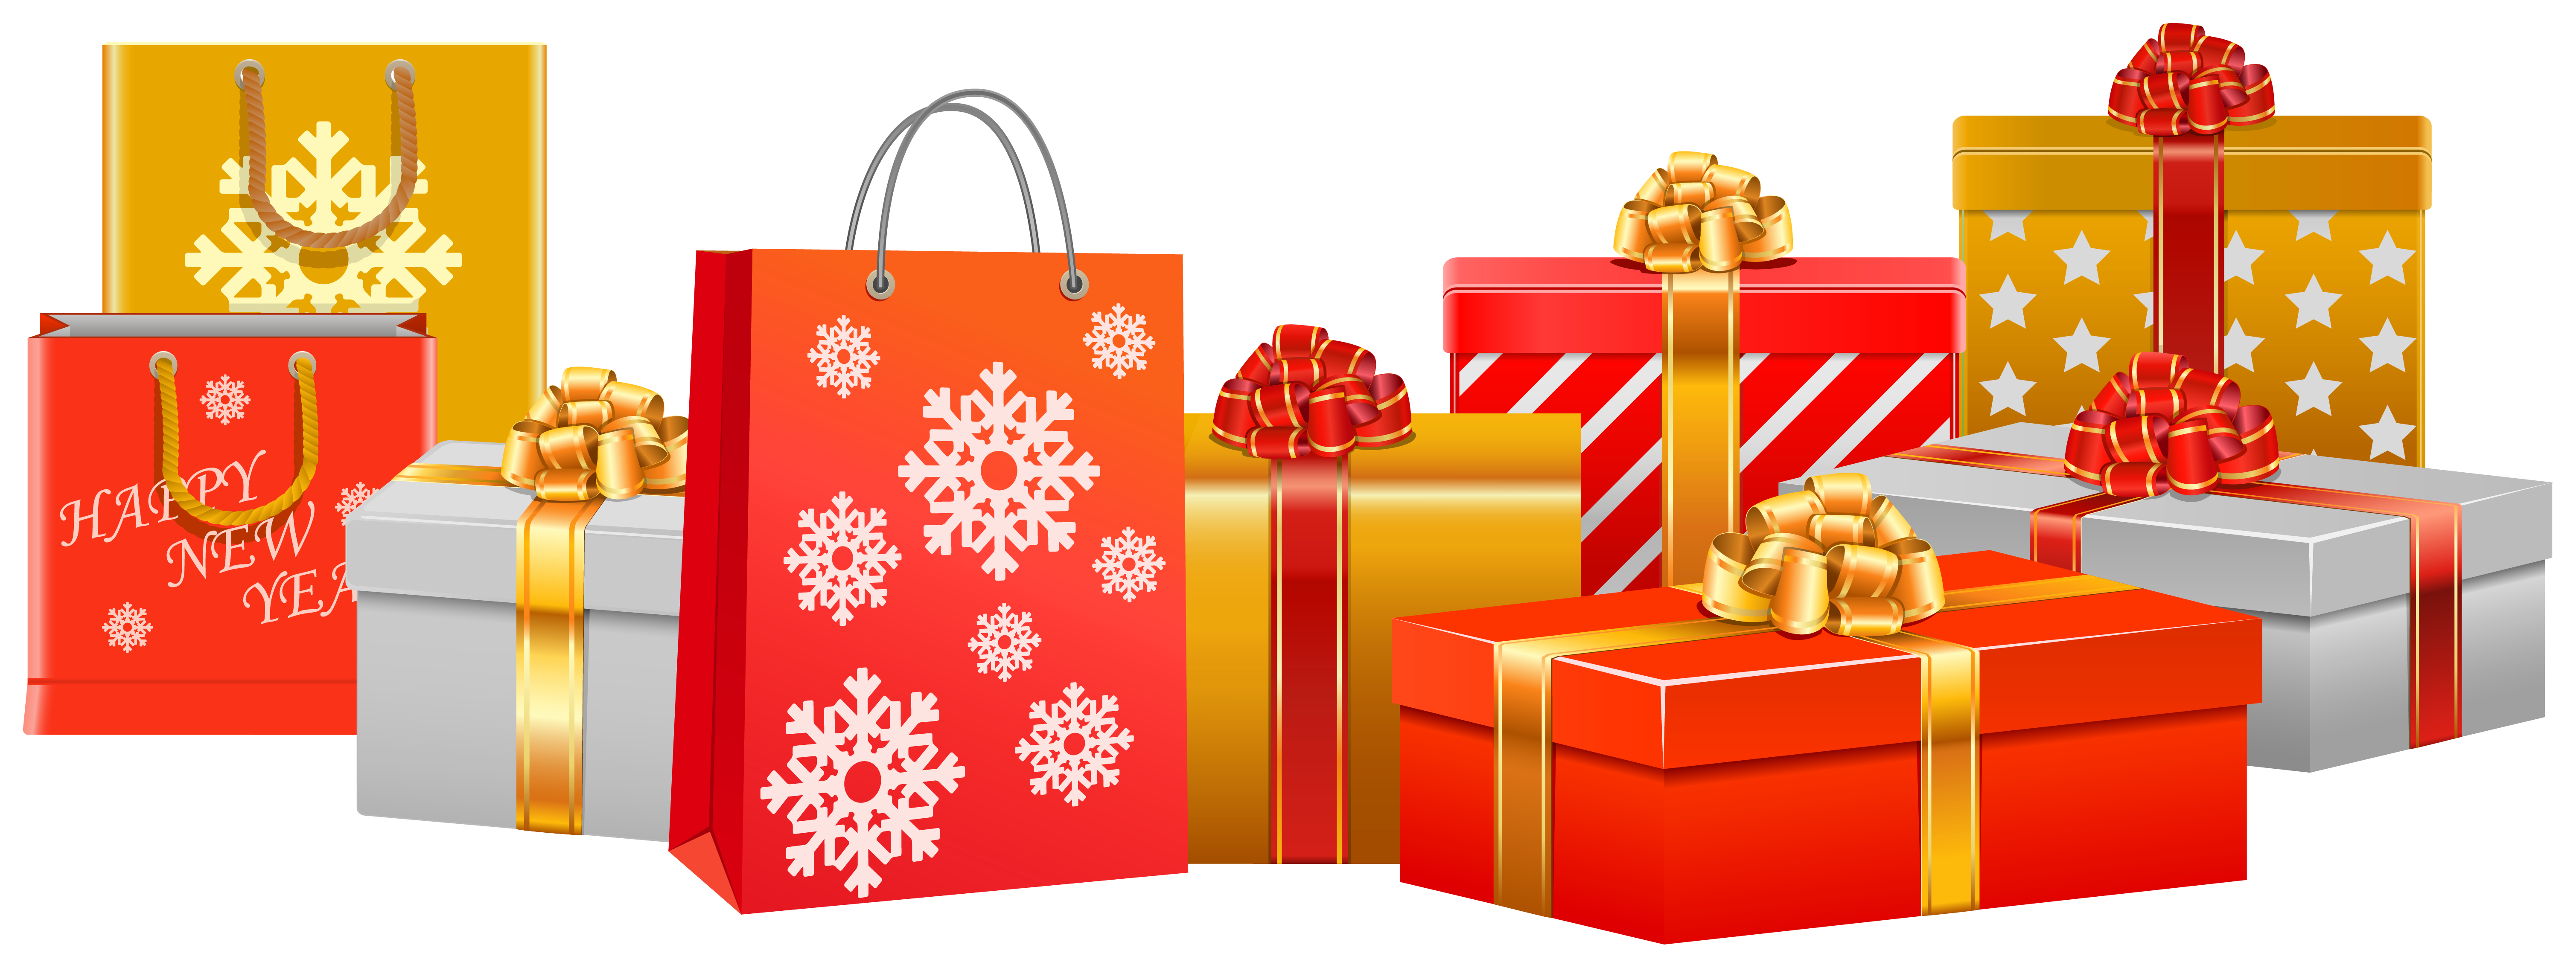 Christmas Gifts PNG Clipart Image | Gallery Yopriceville - High ...